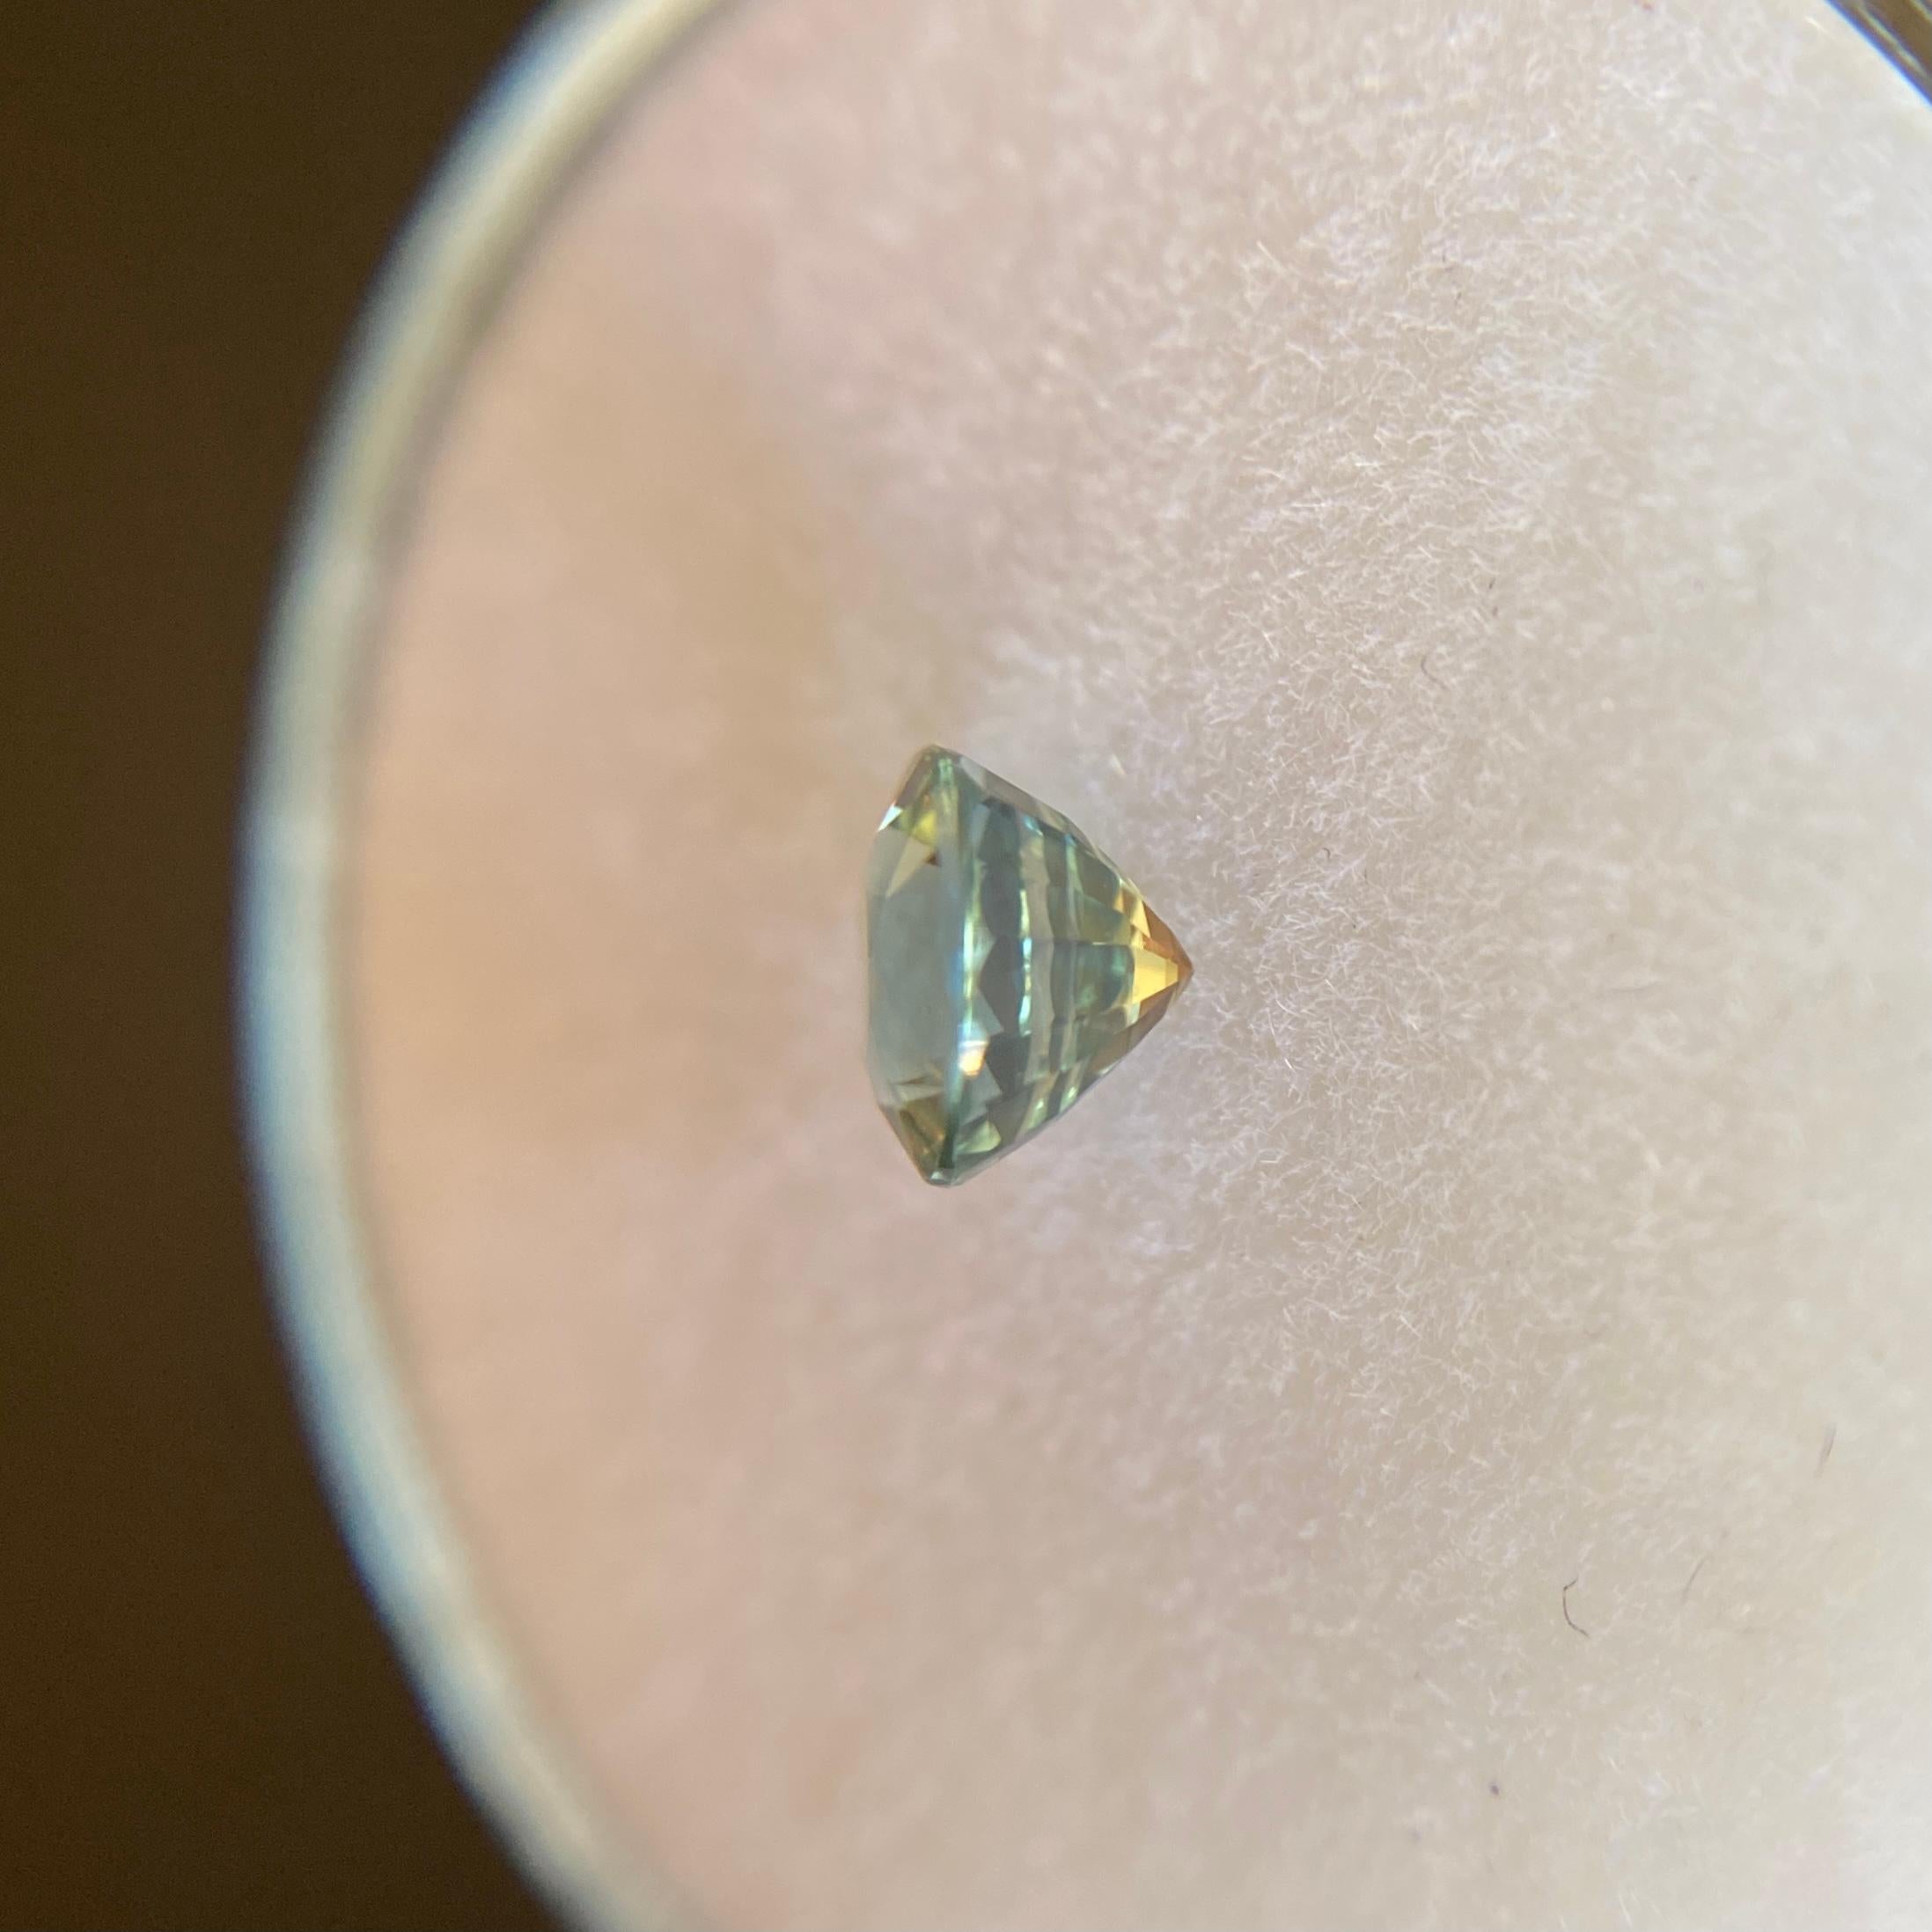 Fine Natural Australian Blue Green Sapphire Gemstone.

0.66 Carat with a beautiful and unique blue green colour and very good clarity, clean stone with only some small natural inclusions visible when looking closely.

Also has an excellent round cut